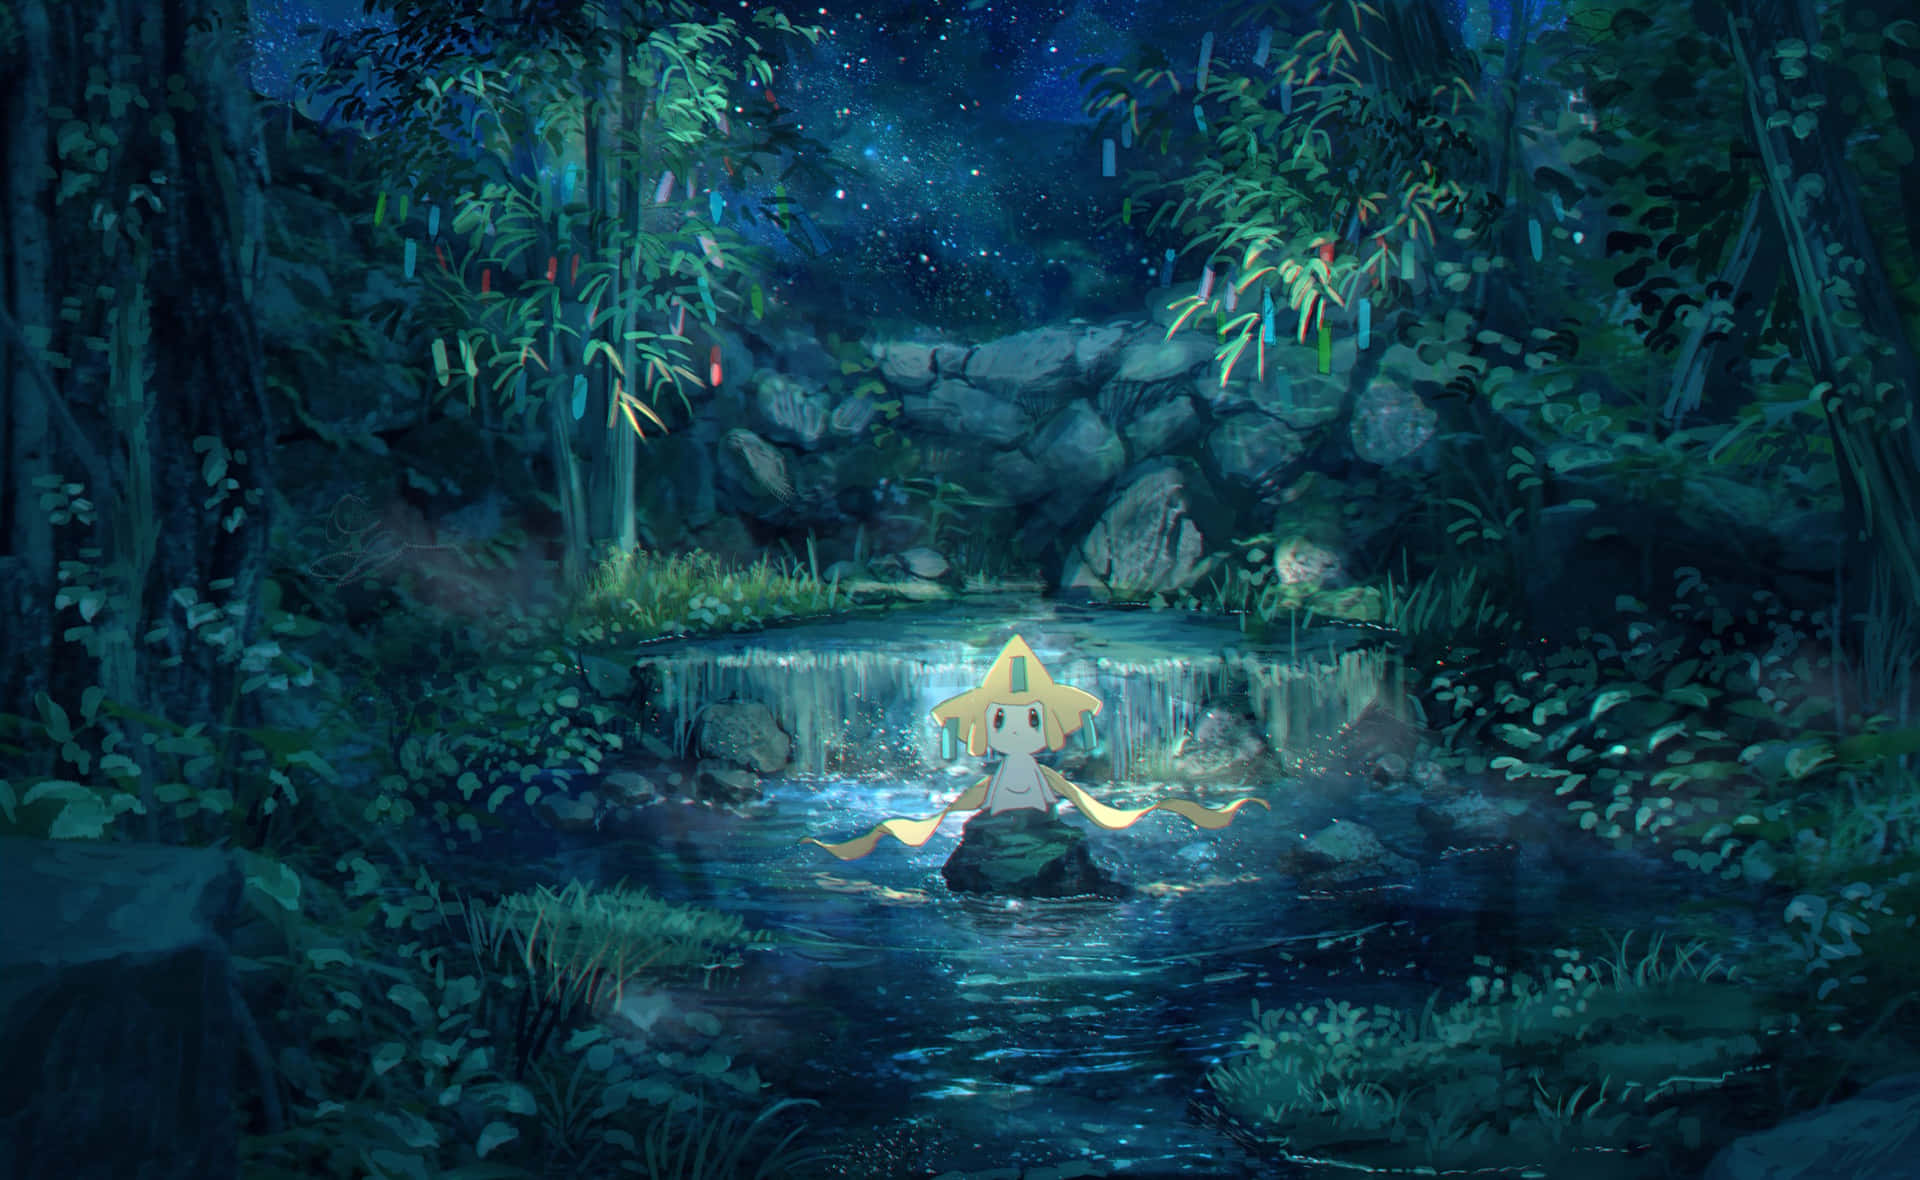 The Forest Nymph Jirachi Pokemon Aesthetic Wallpaper